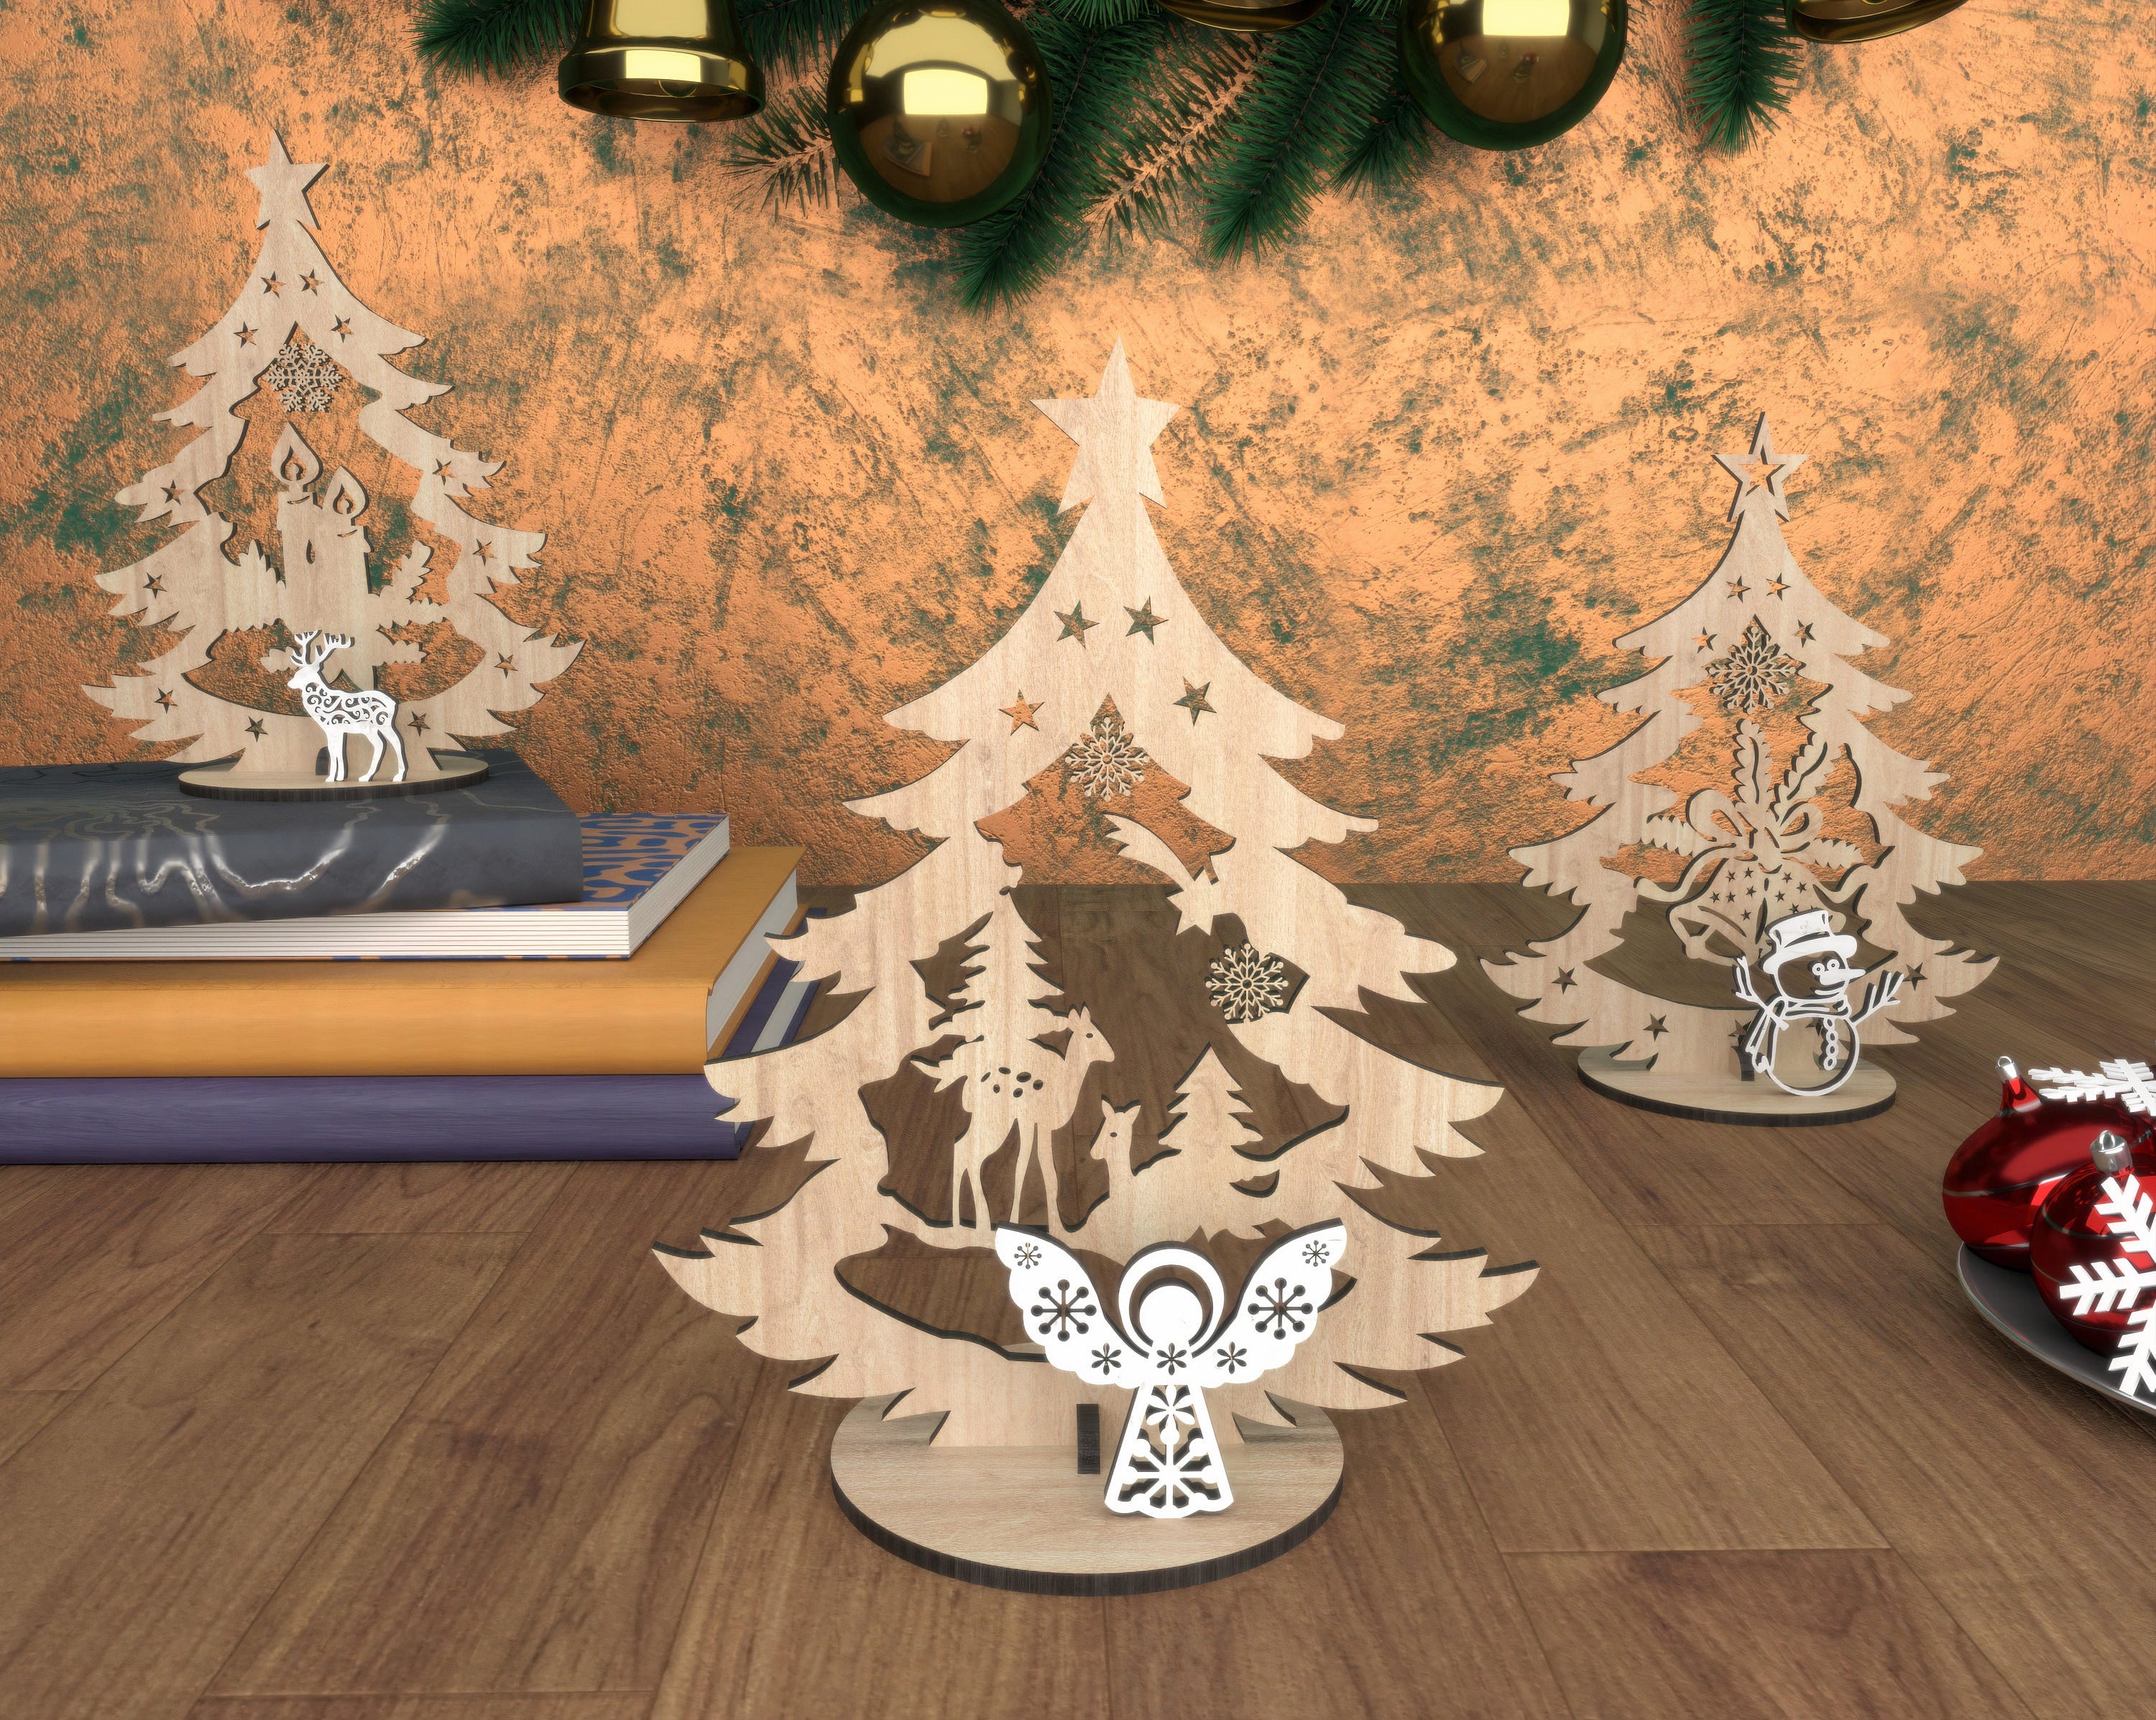 3 Different Laser Cut Files Standing Christmas Trees with Deer Gifts and Snowman Laser cut files Digital Download SVG Dxf Pdf Cdr Ai